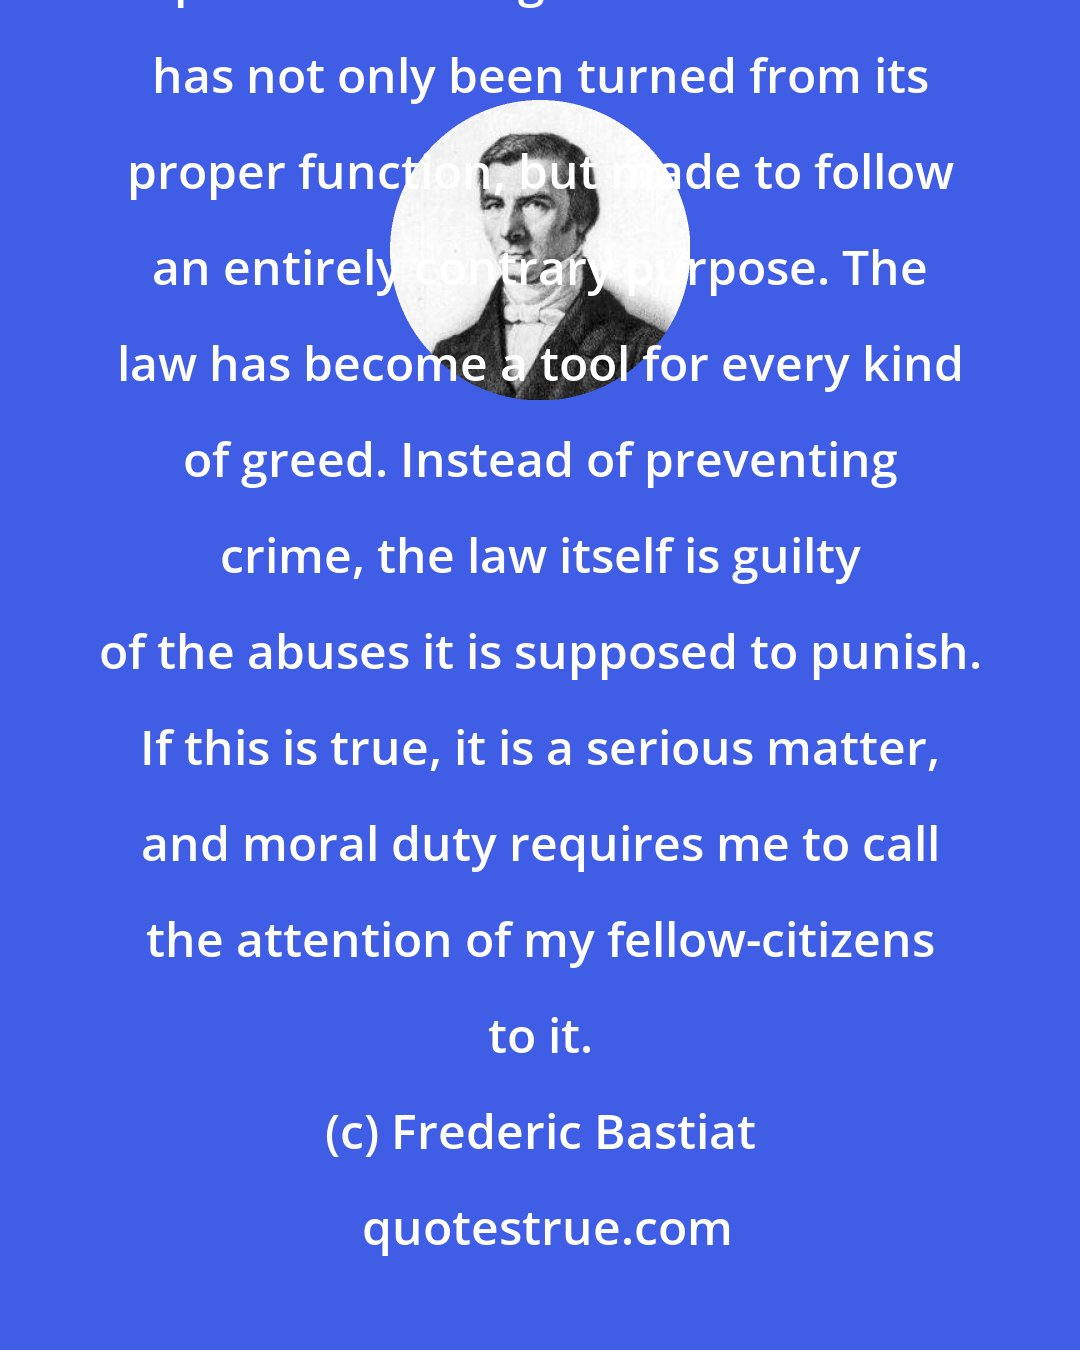 Frederic Bastiat: The law has been perverted, and the powers of the state have become perverted along with it. The law has not only been turned from its proper function, but made to follow an entirely contrary purpose. The law has become a tool for every kind of greed. Instead of preventing crime, the law itself is guilty of the abuses it is supposed to punish. If this is true, it is a serious matter, and moral duty requires me to call the attention of my fellow-citizens to it.